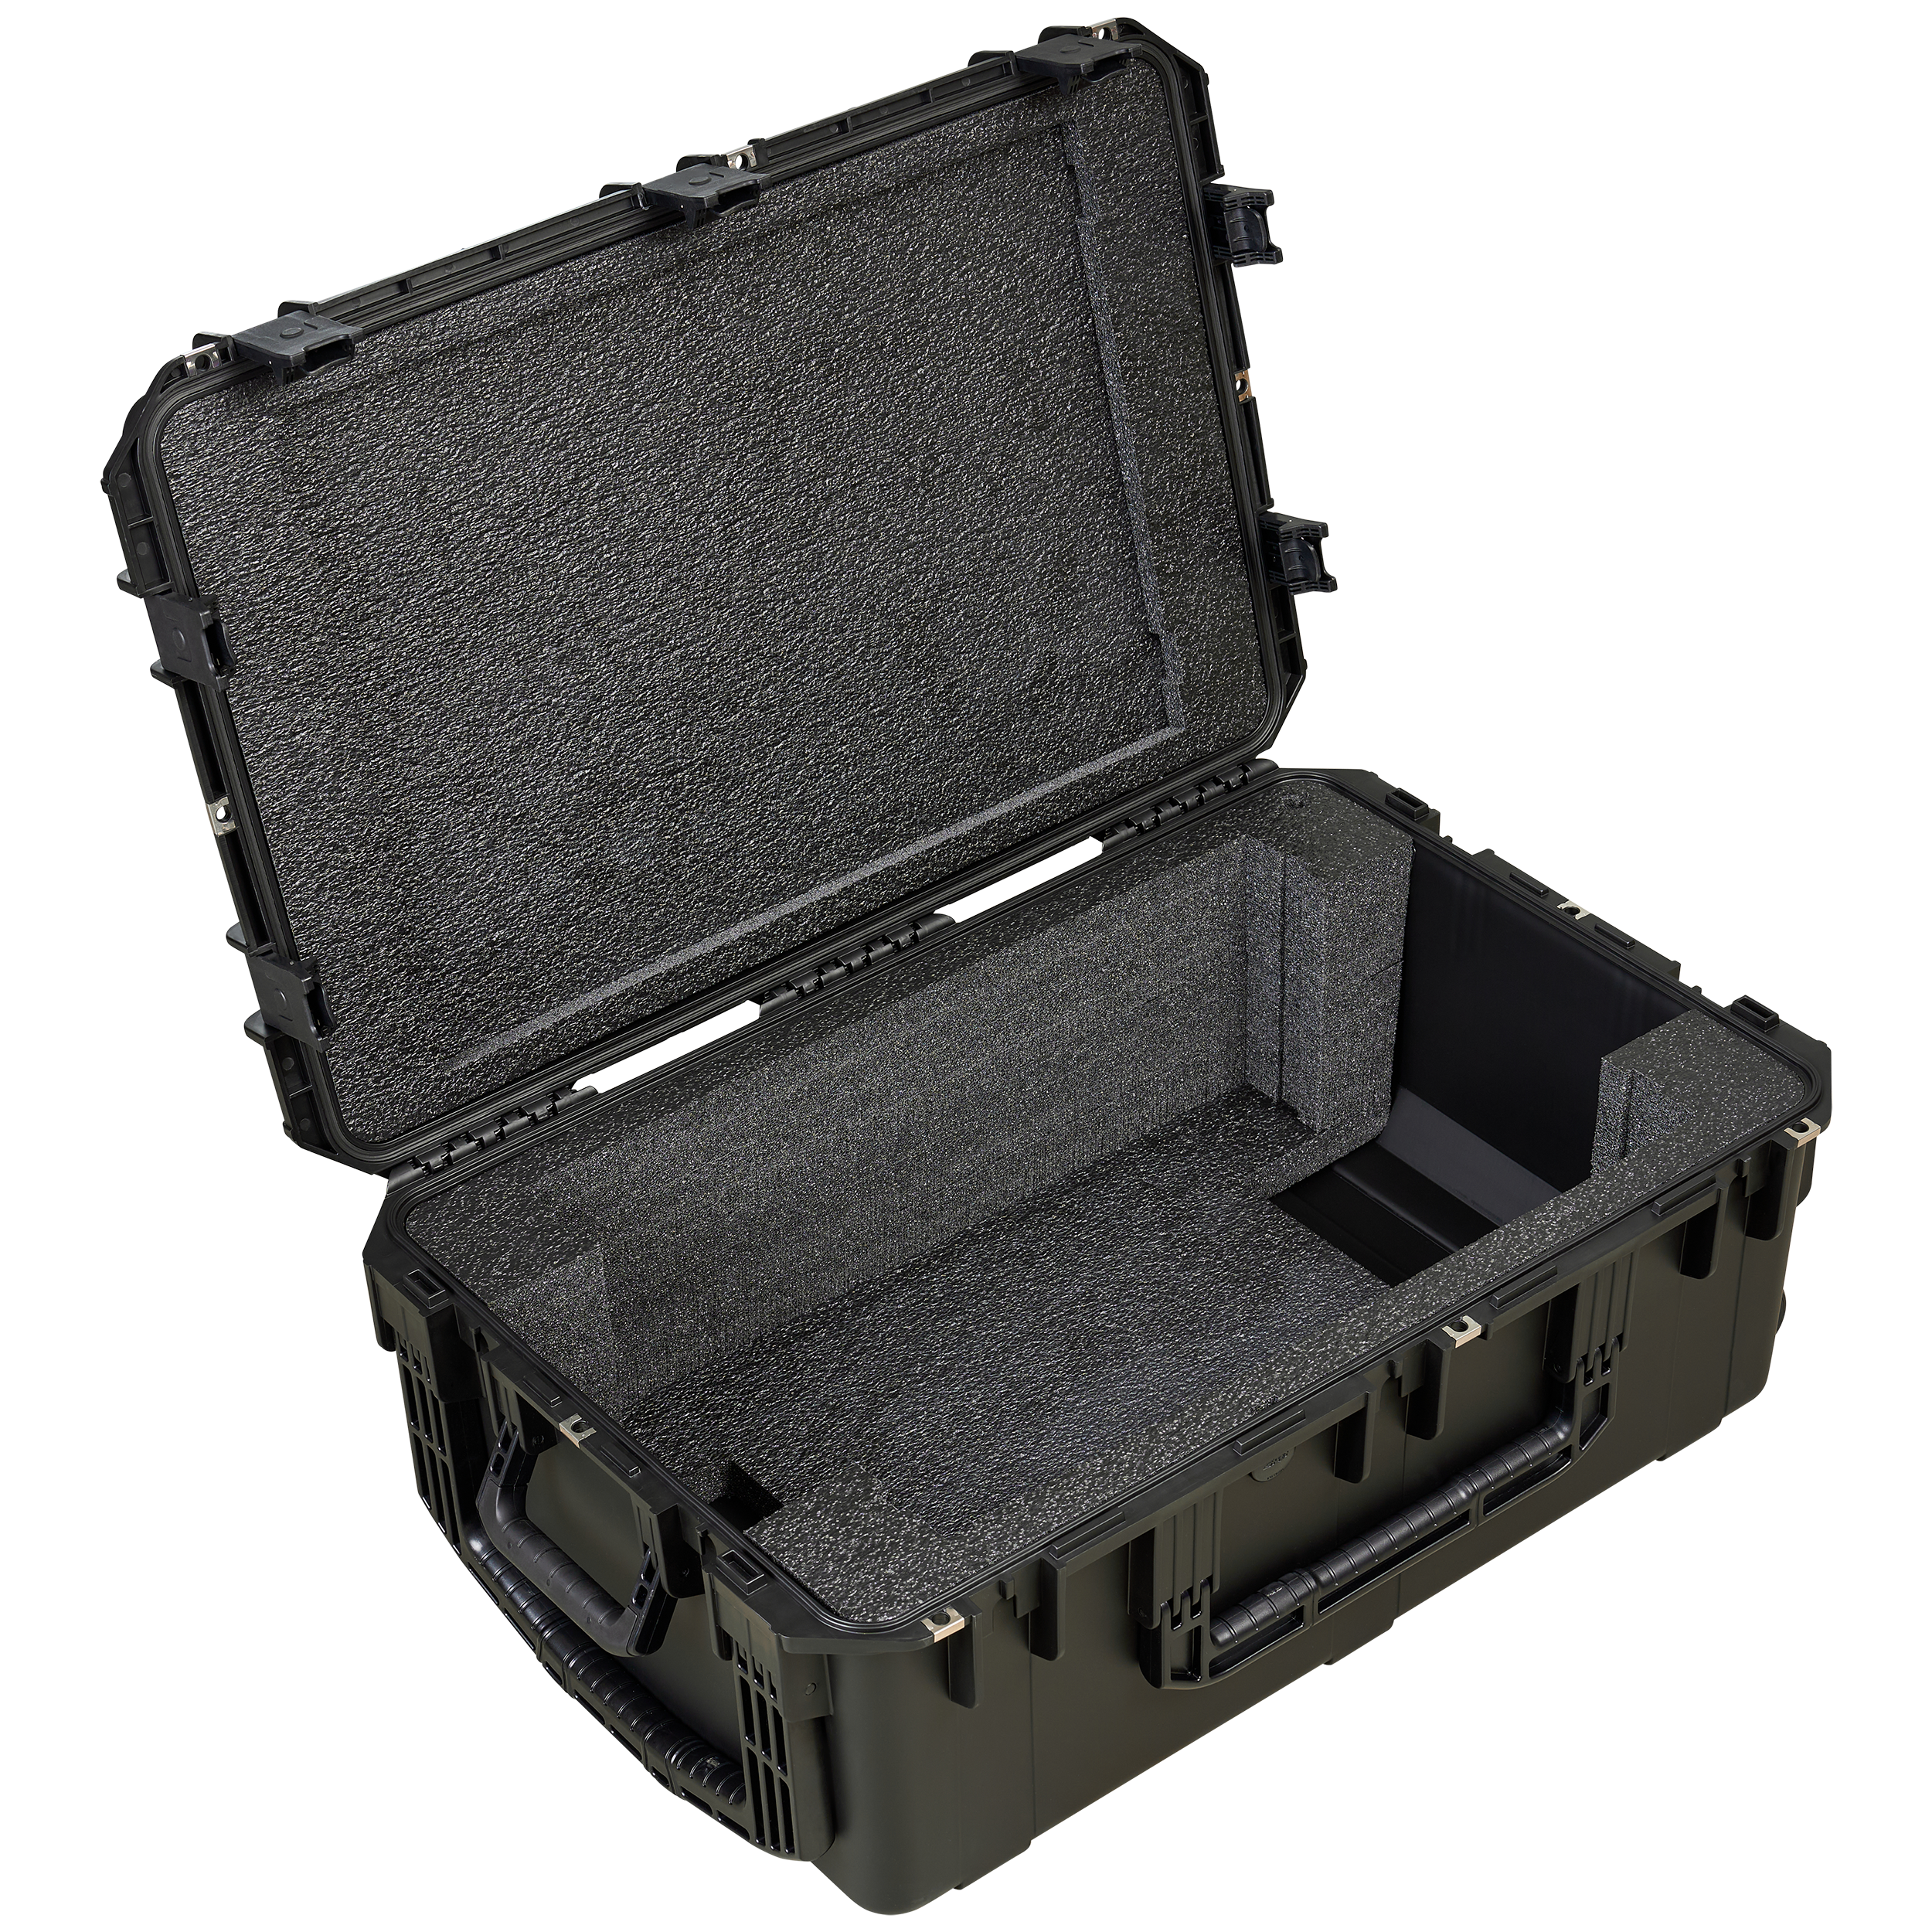 BYFP ipCase for RCF TT808